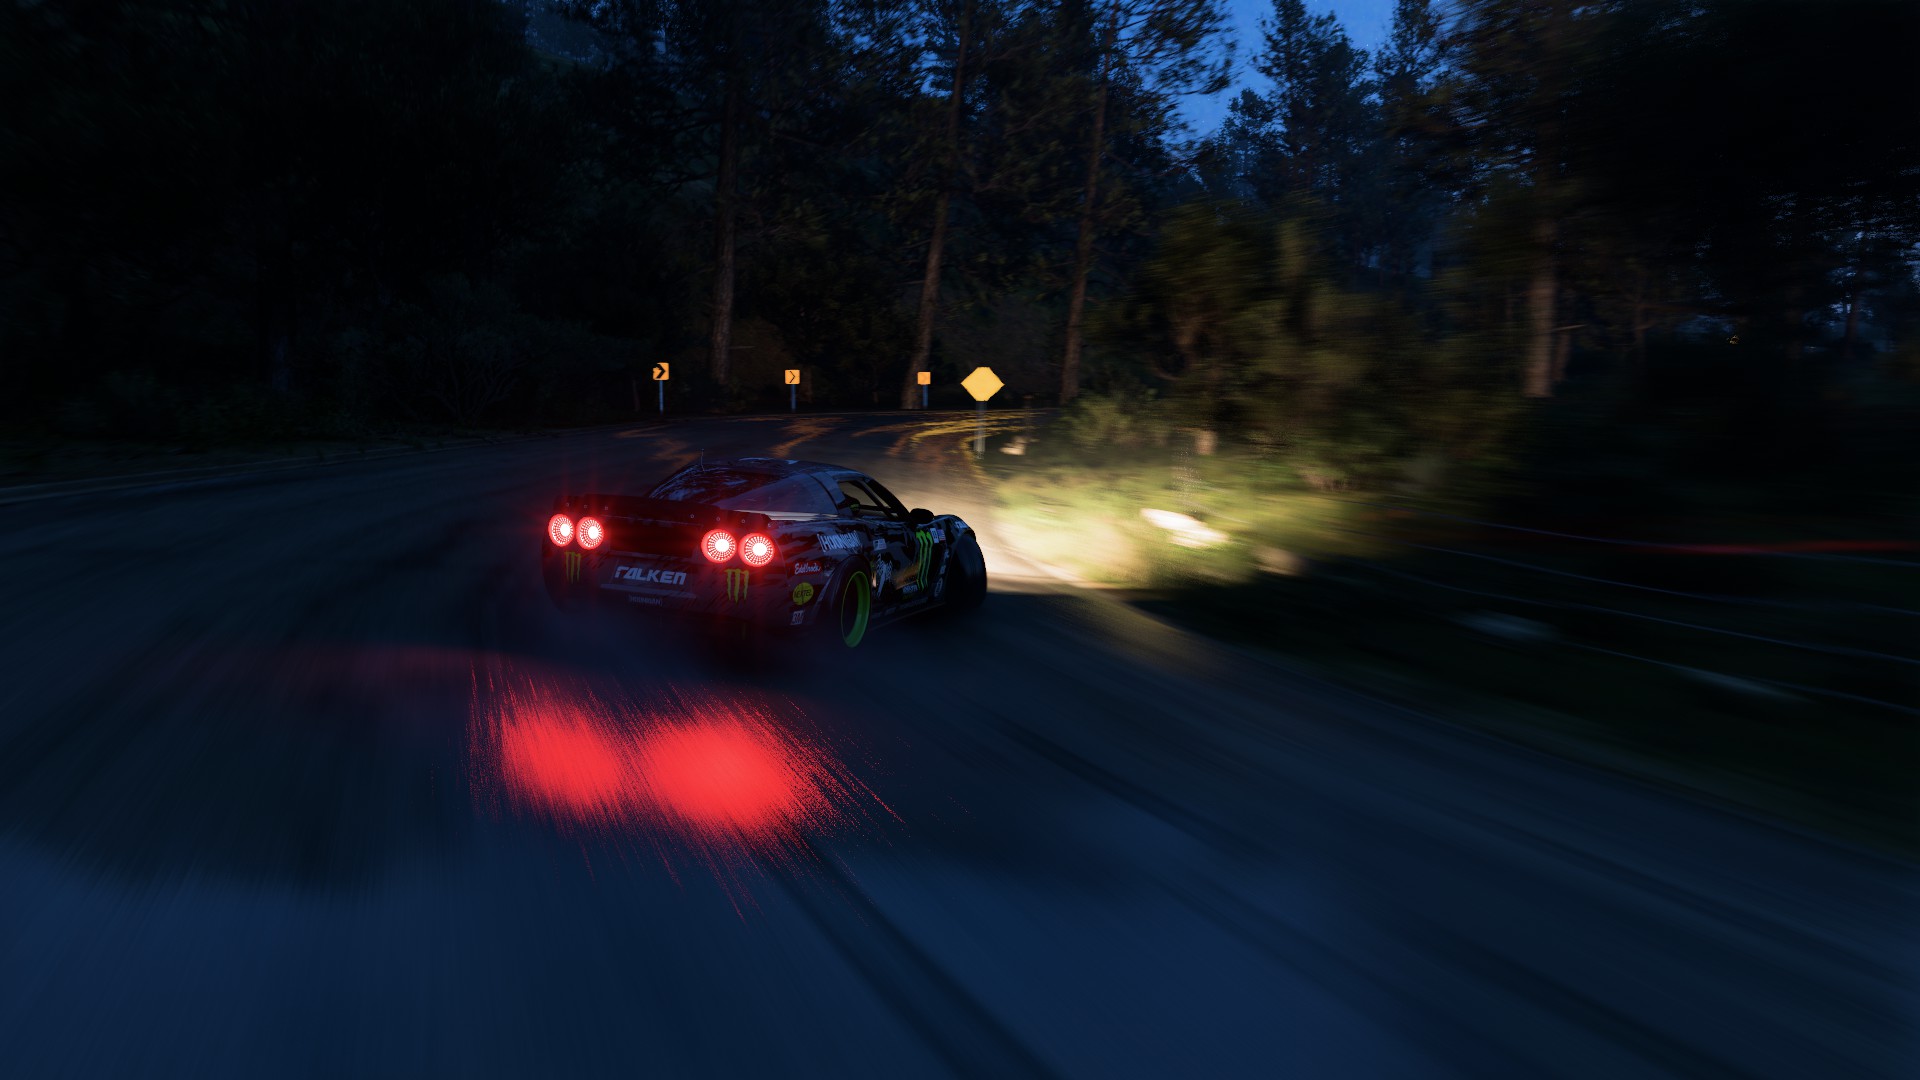 General 1920x1080 Forza Horizon 5 Formula Drift Corvette therapy video games Chevrolet American cars PlaygroundGames livery Turn 10 Studios V8 engine Xbox Game Studios road motion blur taillights rear view driving video game art blurred trees signs CGI arrow (design) headlights